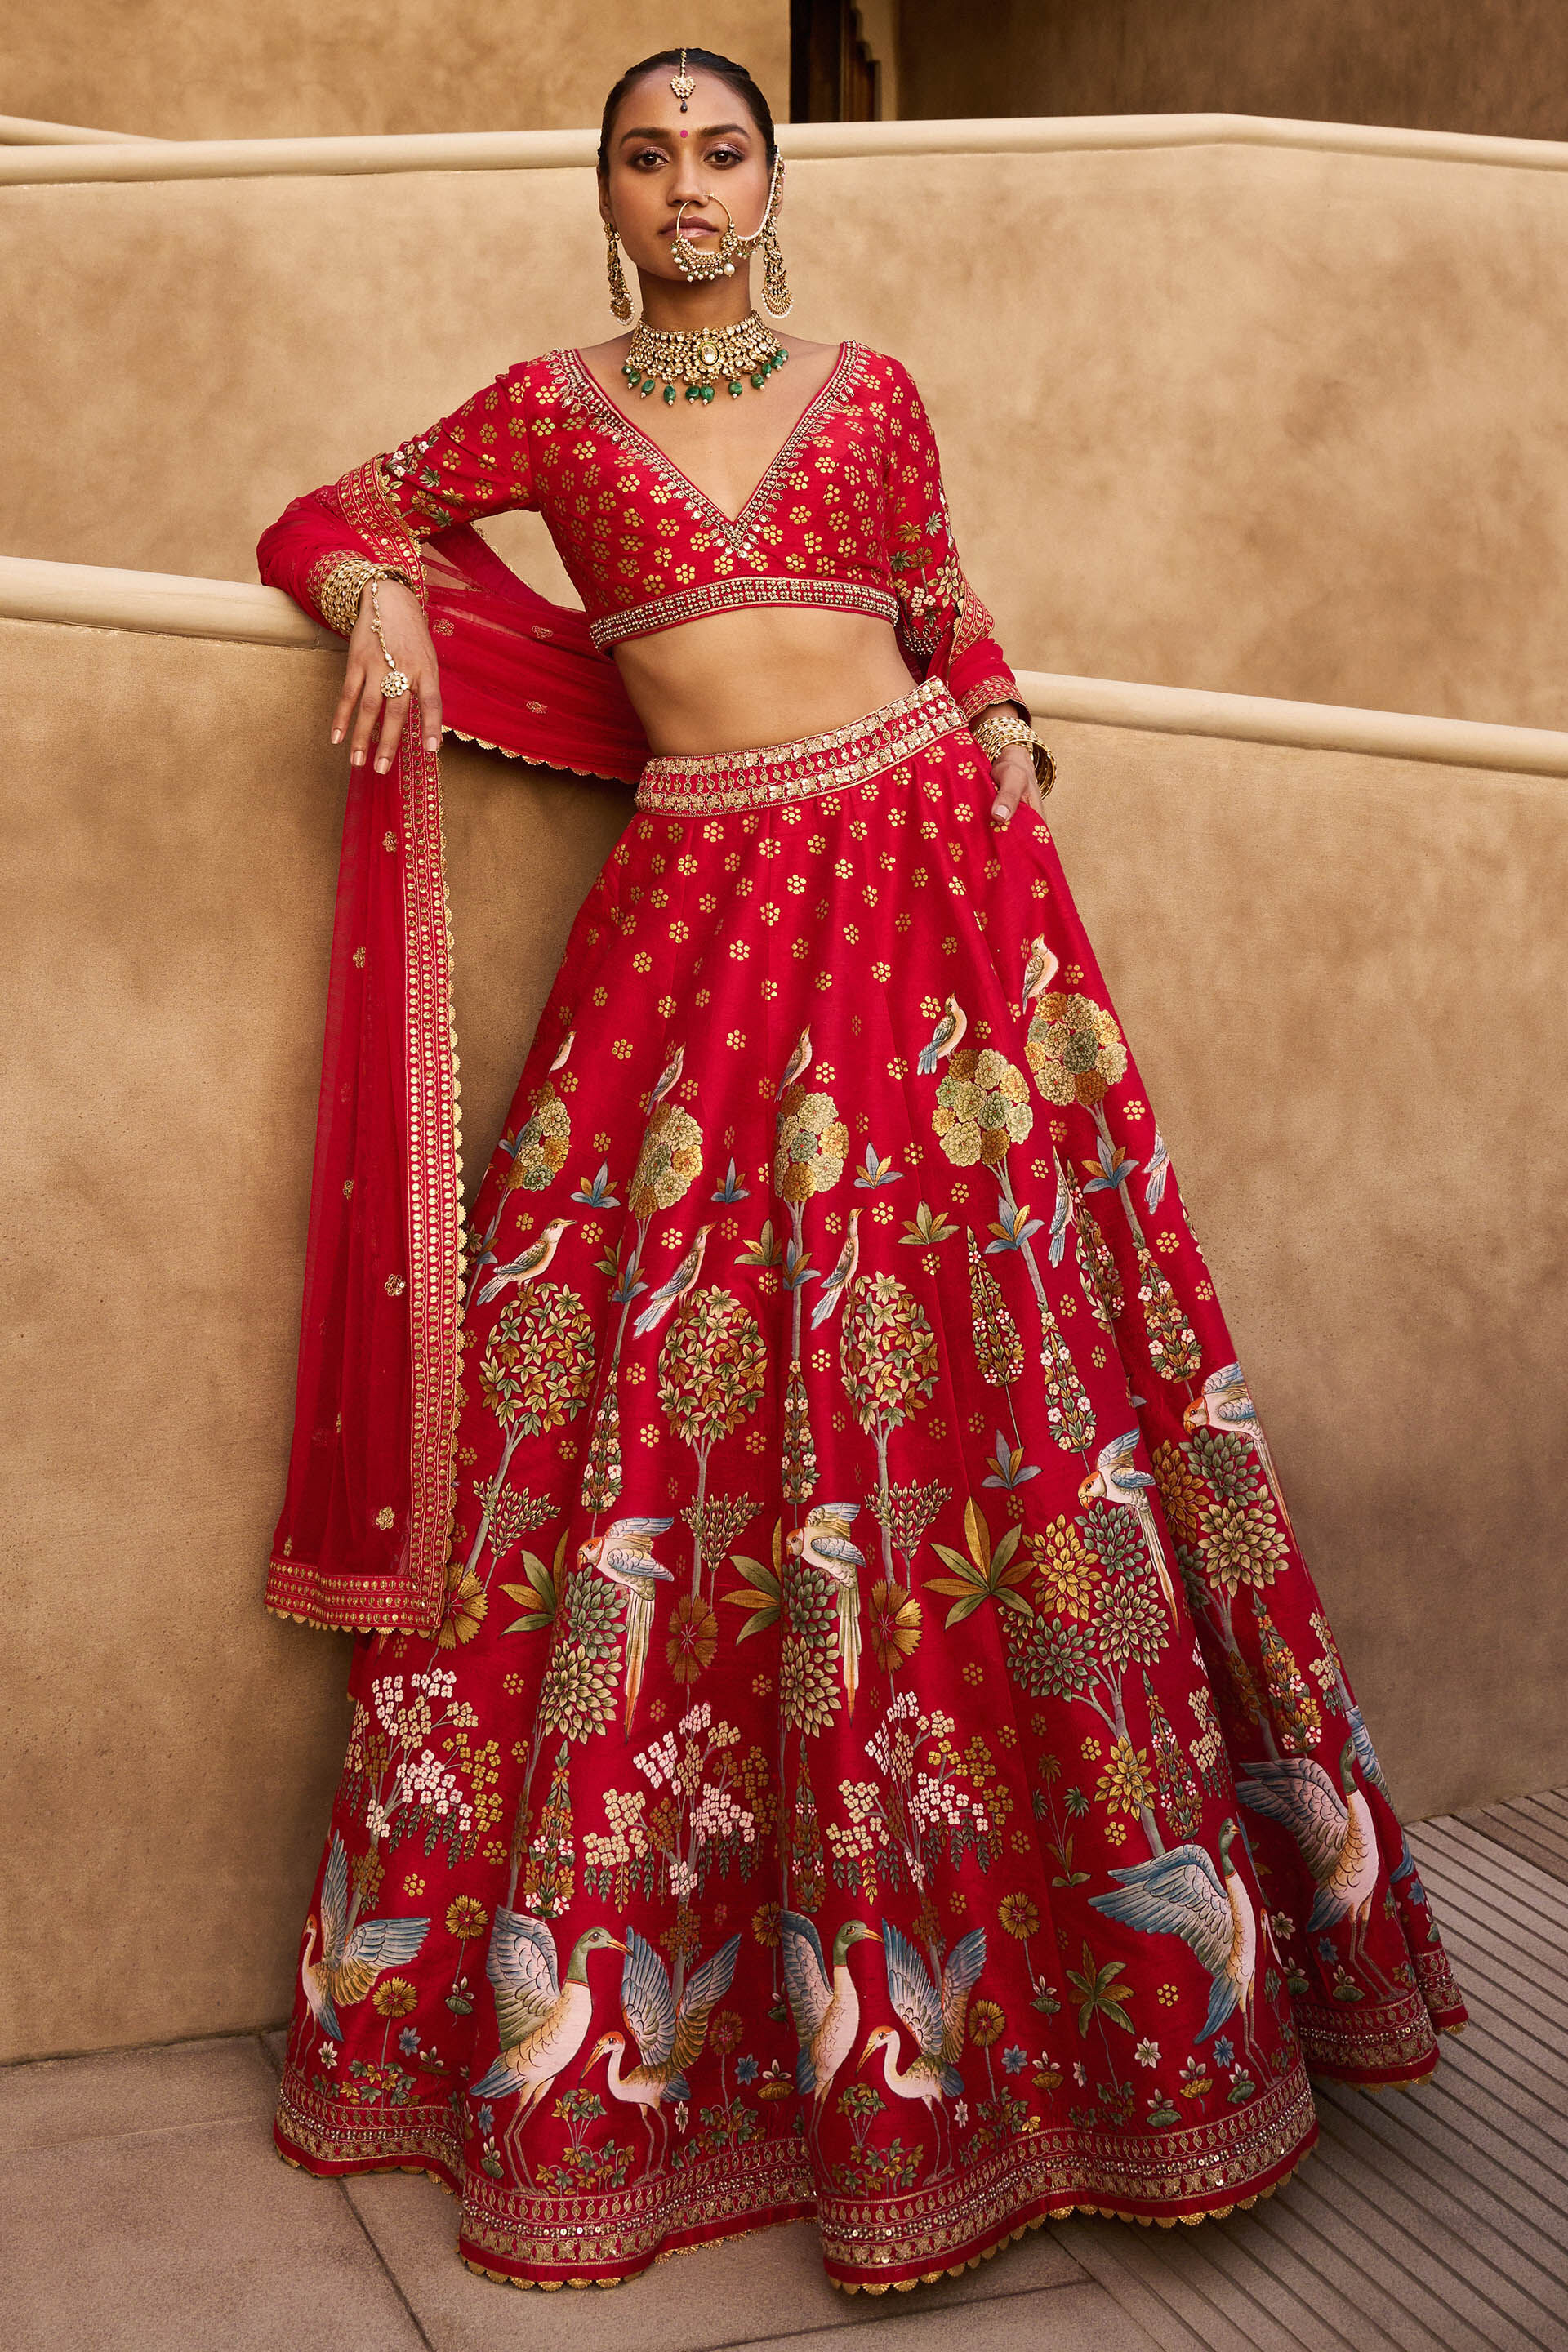 Bridal Lehengas : Red tapeta silk heavy thread sequence and ...